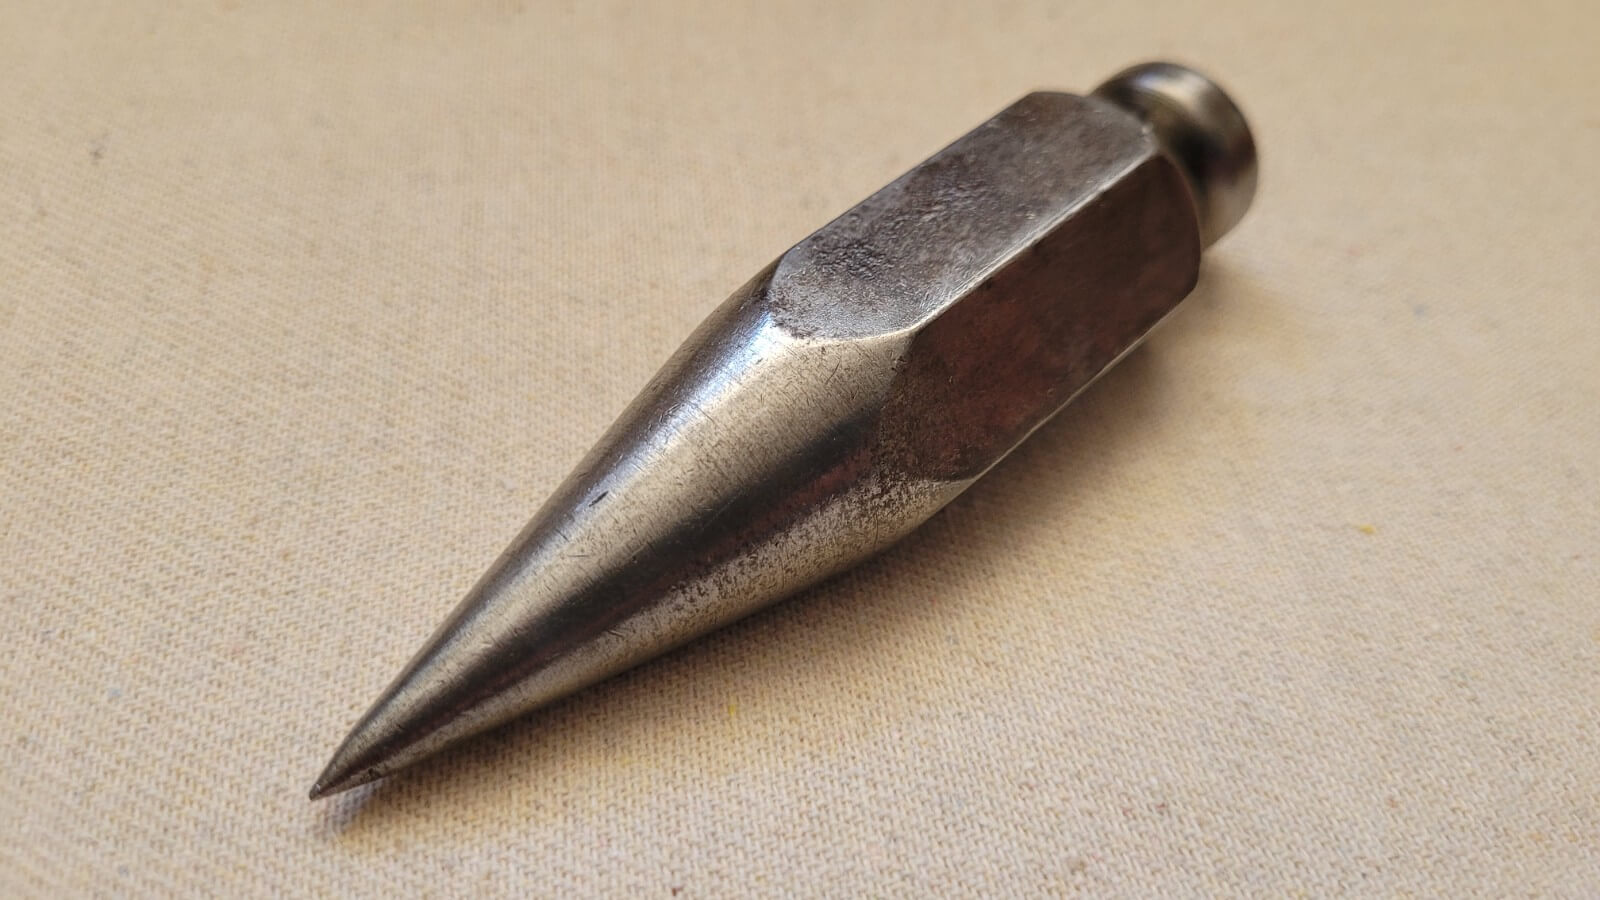 Solid steel 100z vintage hexagonal plumb bob, 4 inches long. This masons or surveyor measuring collectible tool